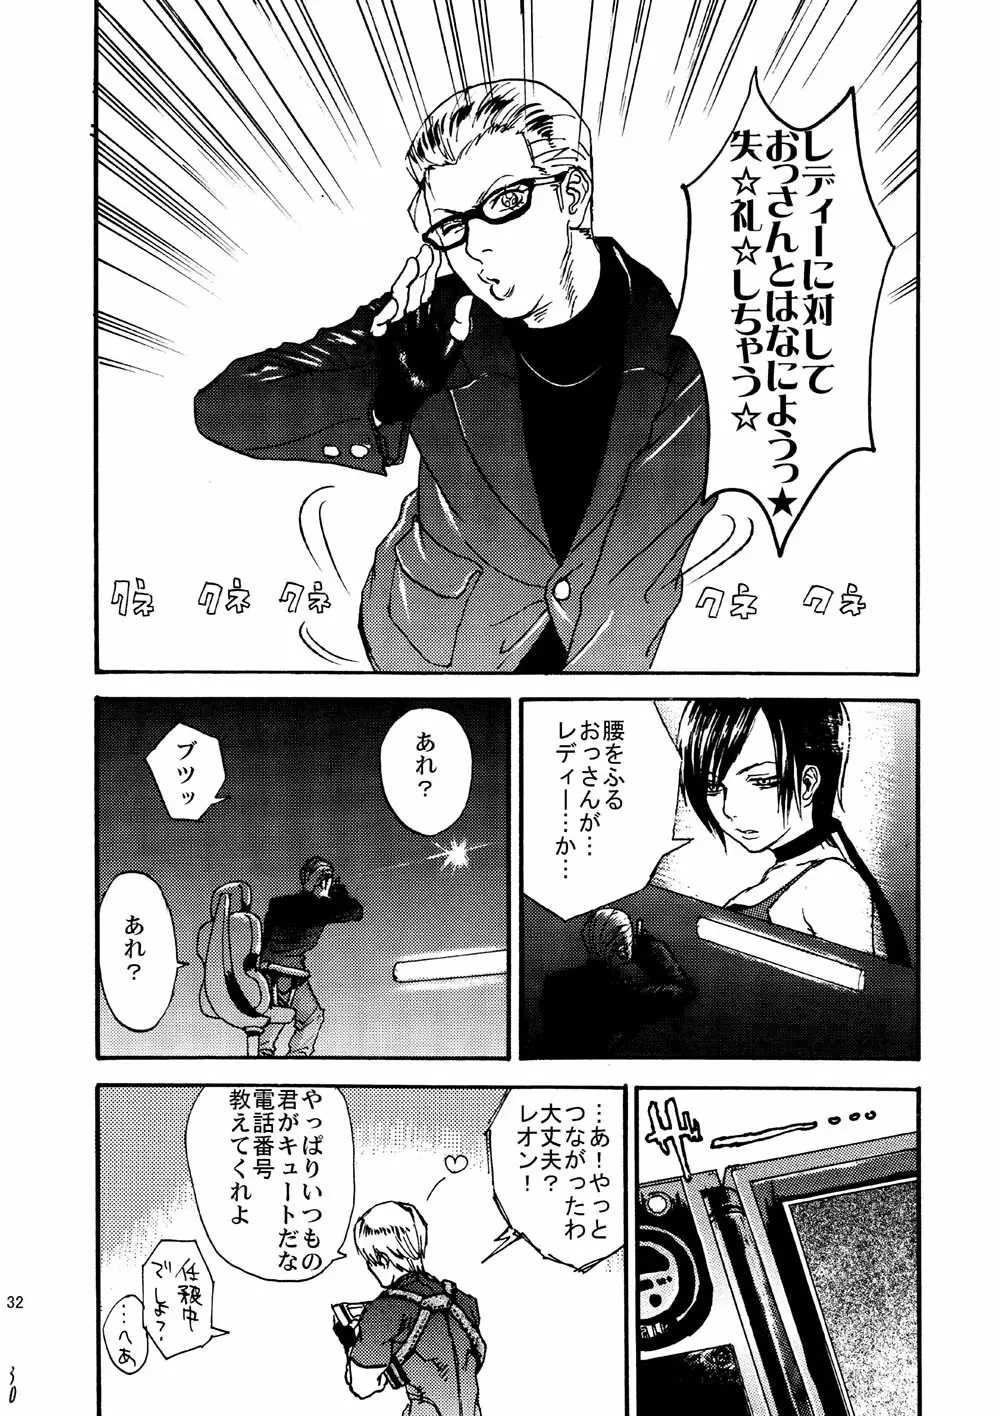 VILLAGE OF FEAR/バイオ４同人誌ｗｅｂ再録 Page.29